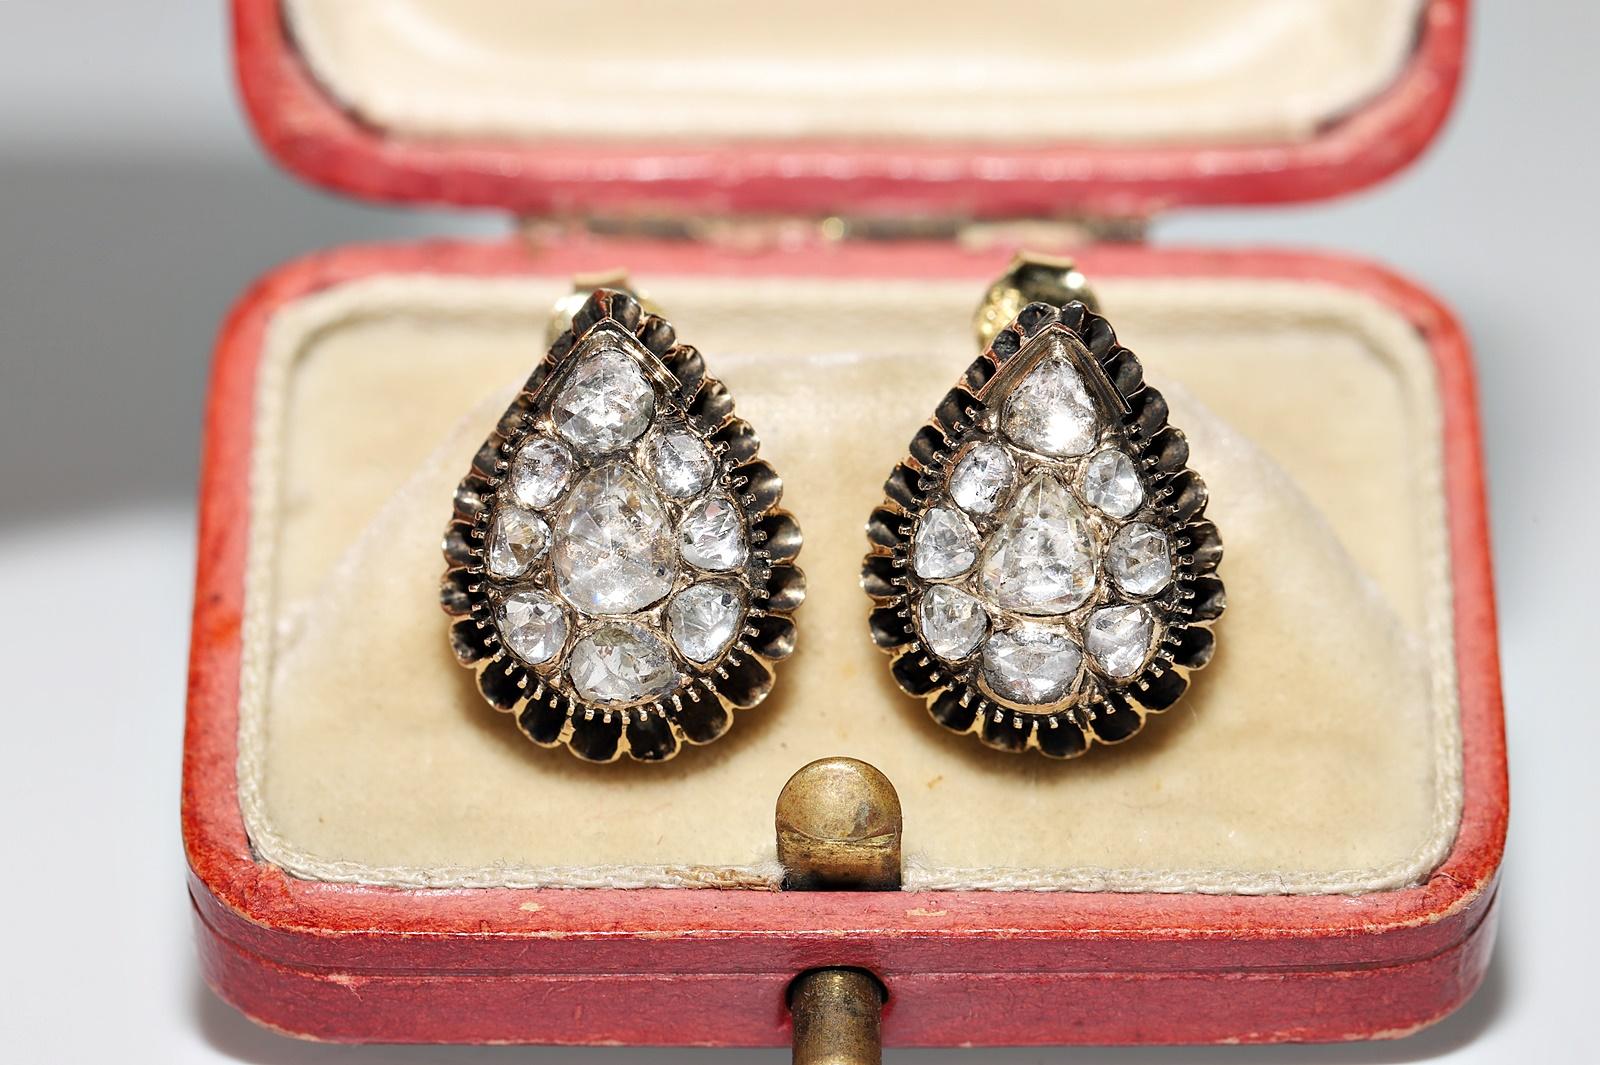 In very good condition.
Total weight is 6.7 grams.
Totally is diamond 1.90 ct.
The diamond is has H-I-J-K color and s1-s2-s3-Pique1 clarity.
Acid tested to be 14k real gold.
The back lock part of the earring has been redone
Box is not